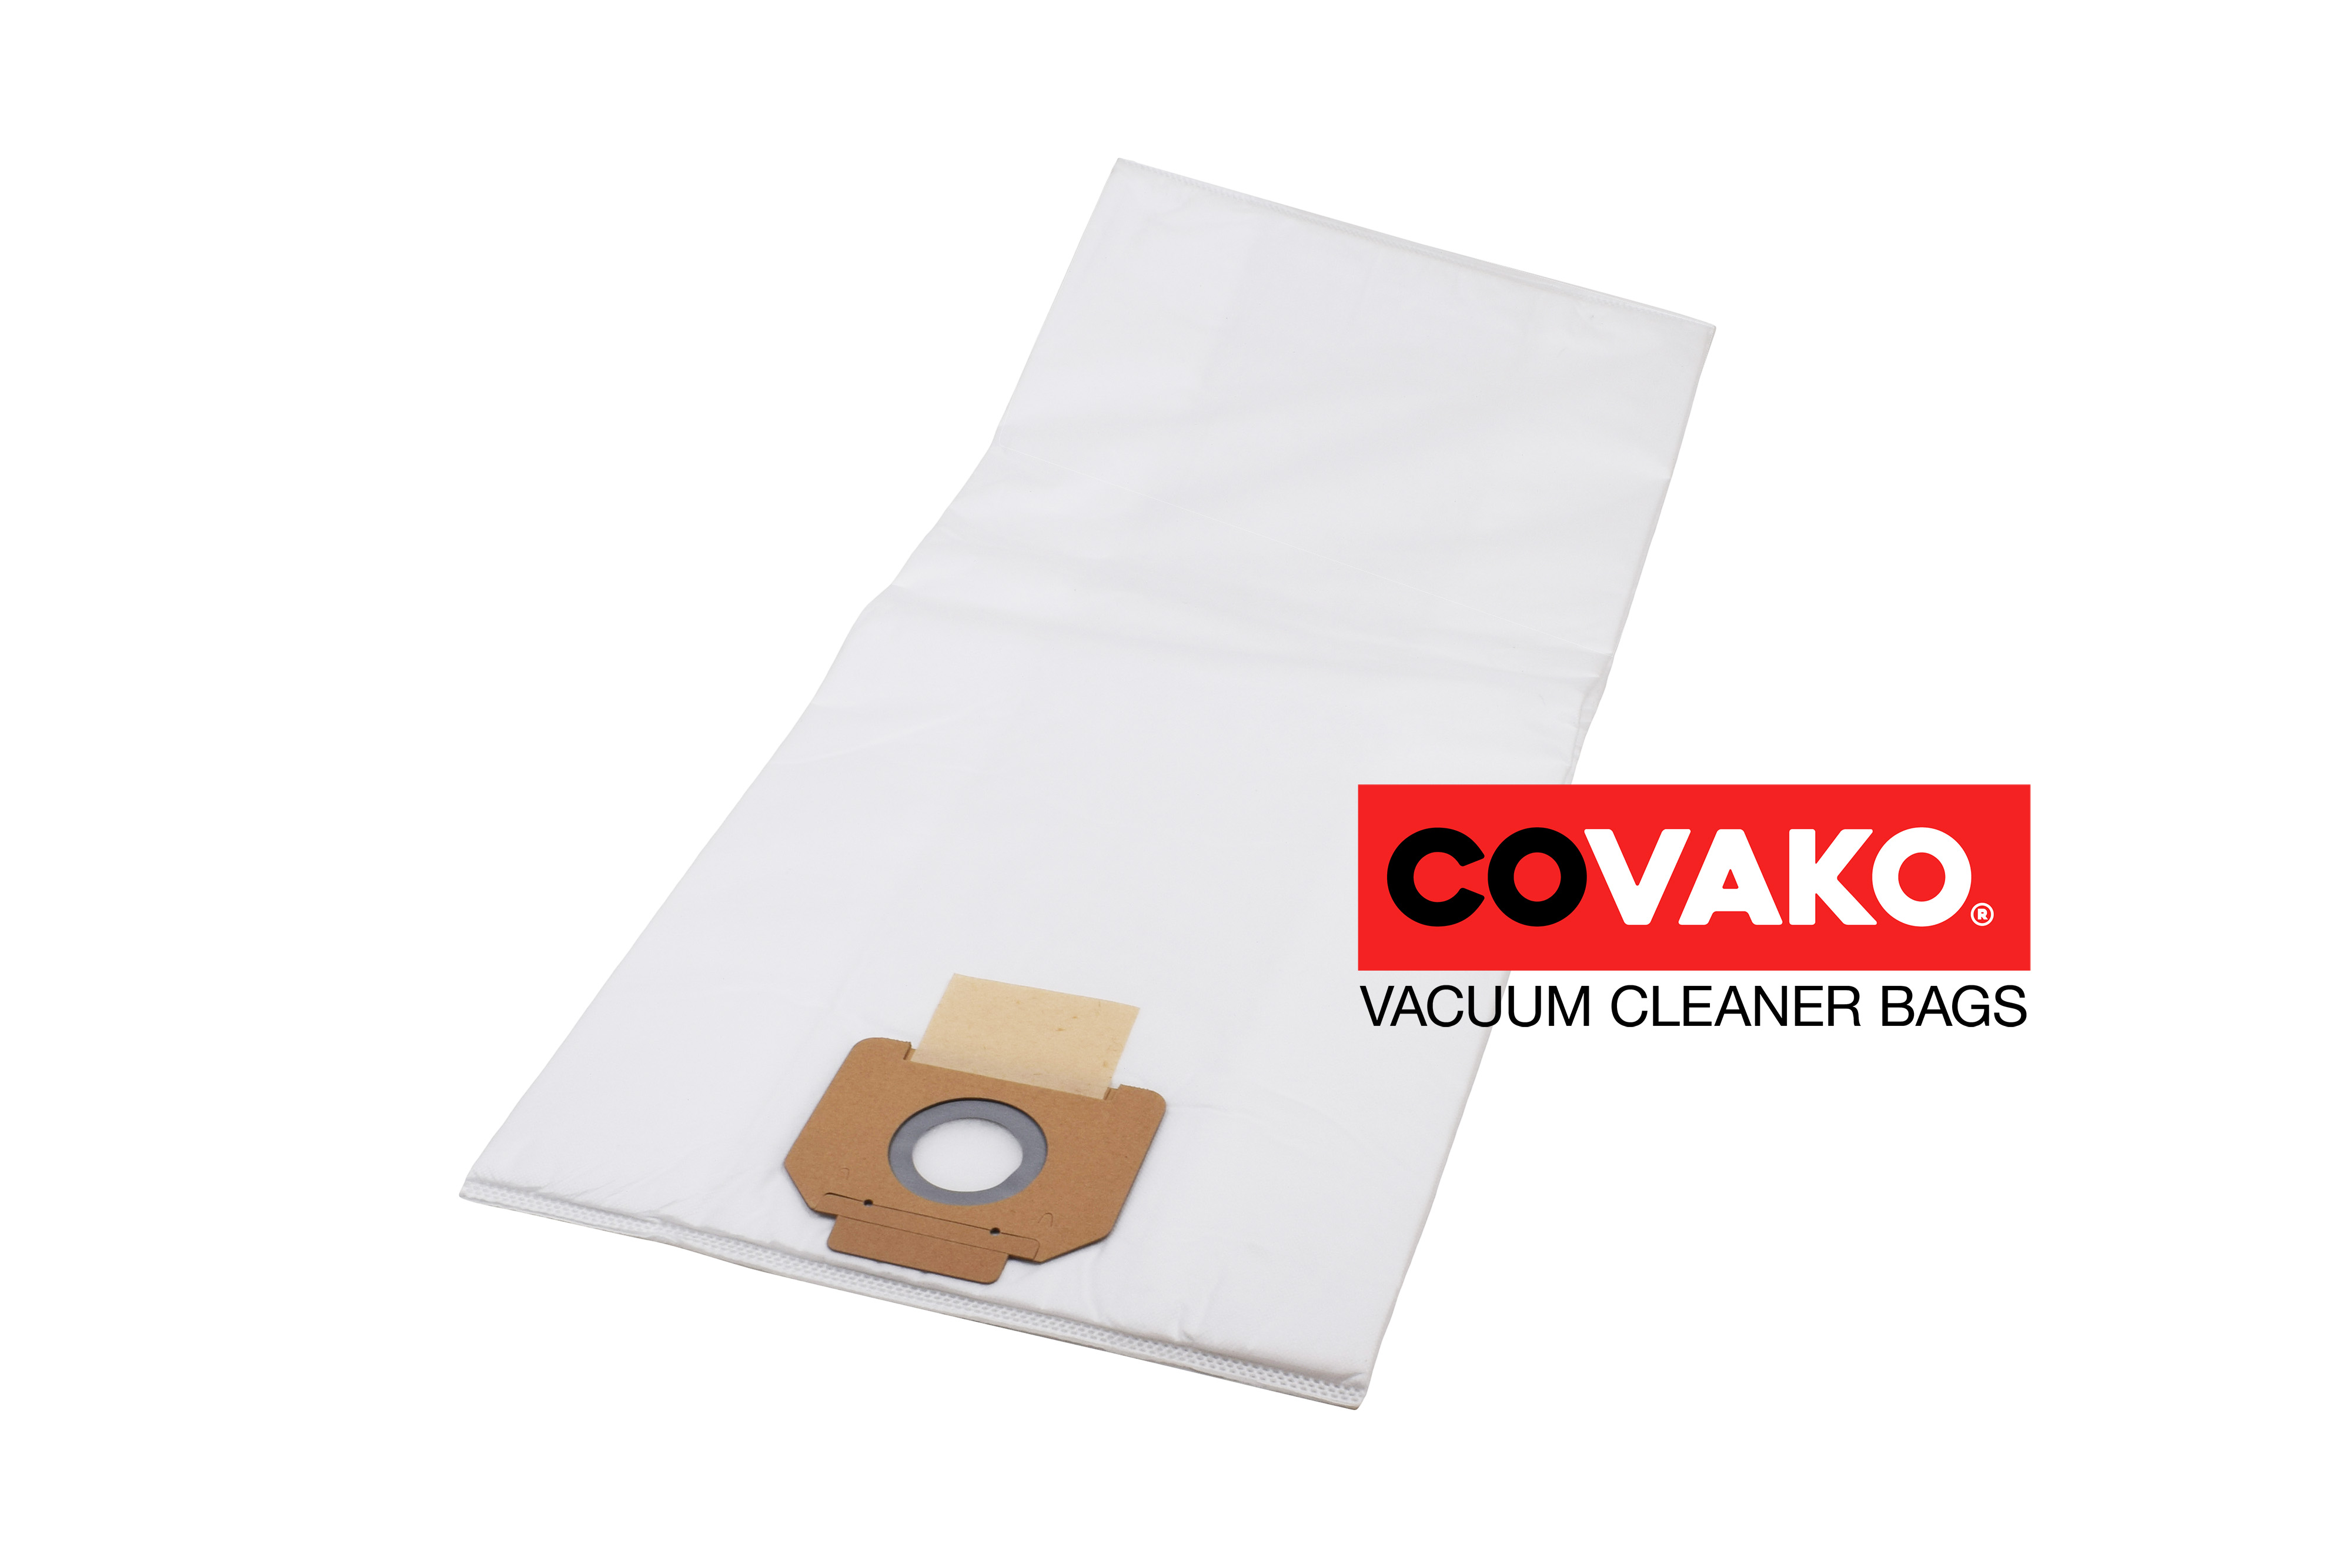 Cleancraft flexCat 390 EOT / Synthesis - Cleancraft vacuum cleaner bags